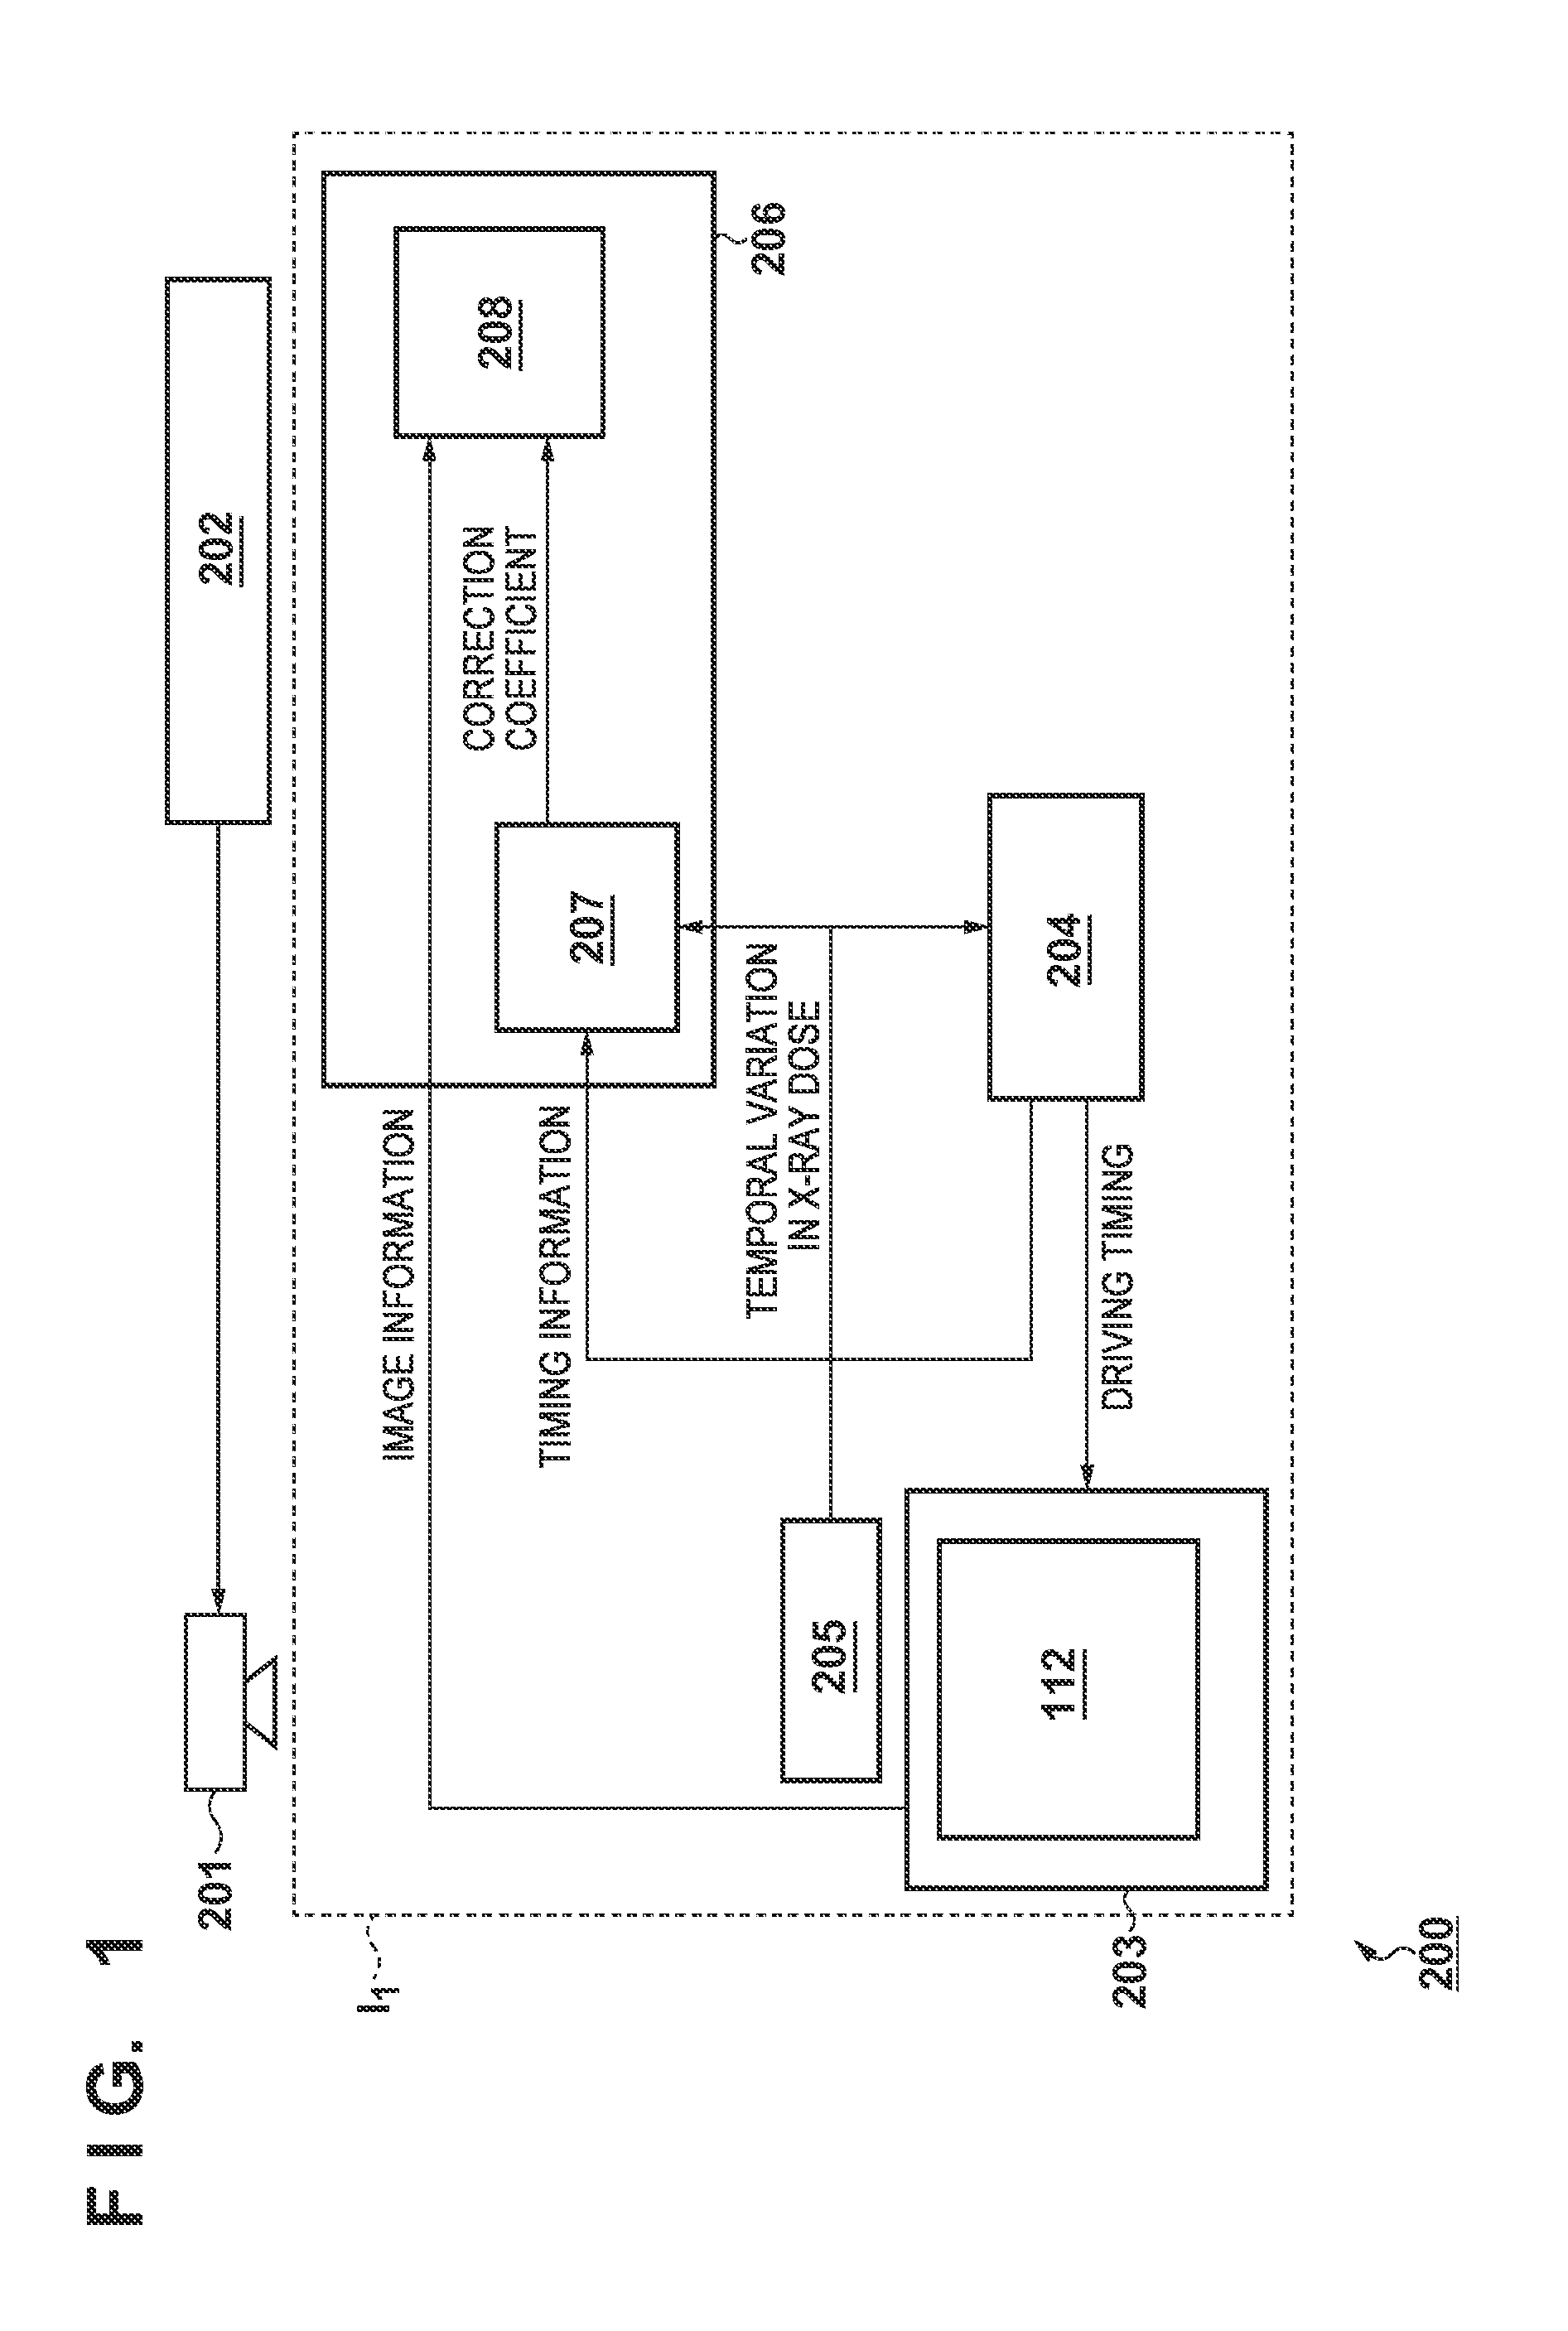 Radiation imaging apparatus, method for controlling the same, and non-transitory computer-readable storage medium